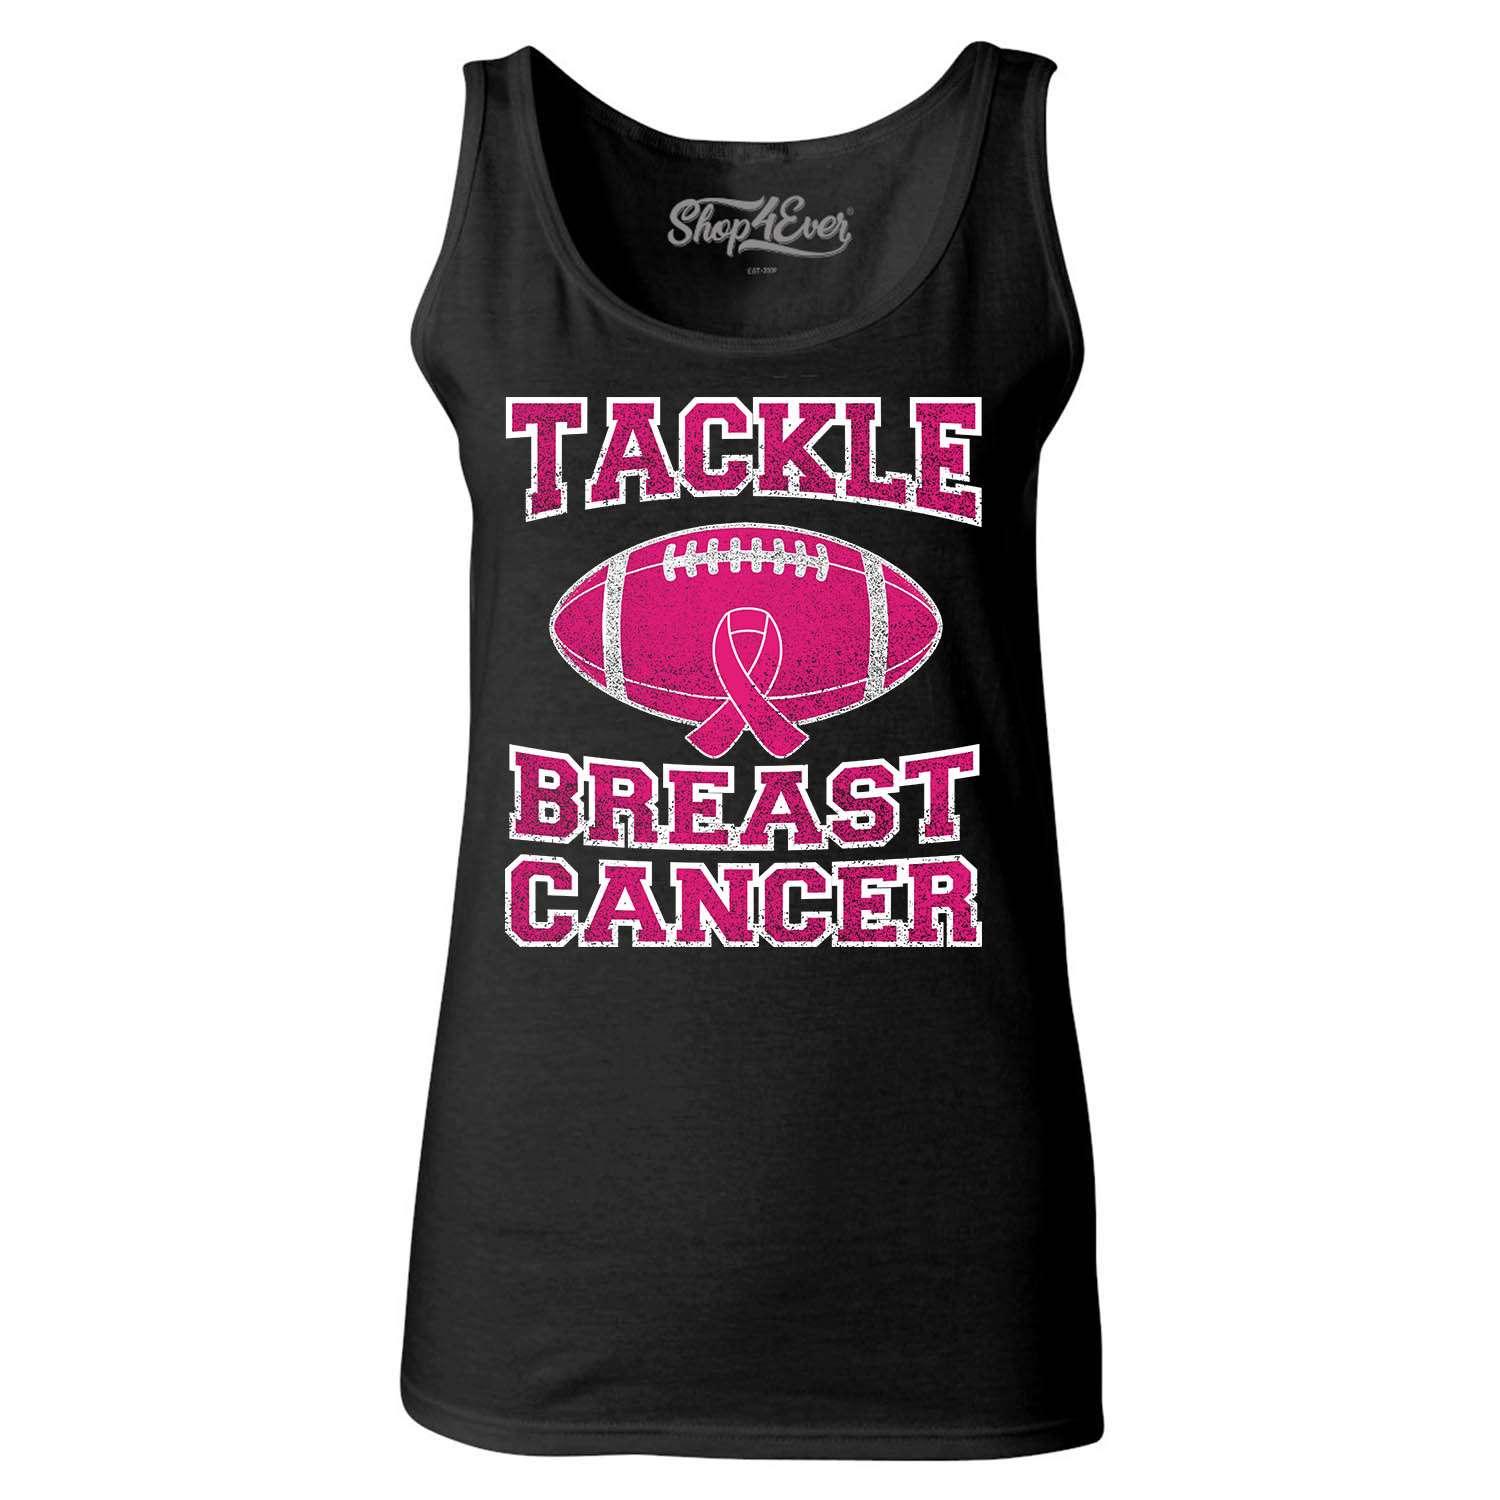 Tackle Breast Cancer Women's Tank Top Breast Cancer Awareness Tee 